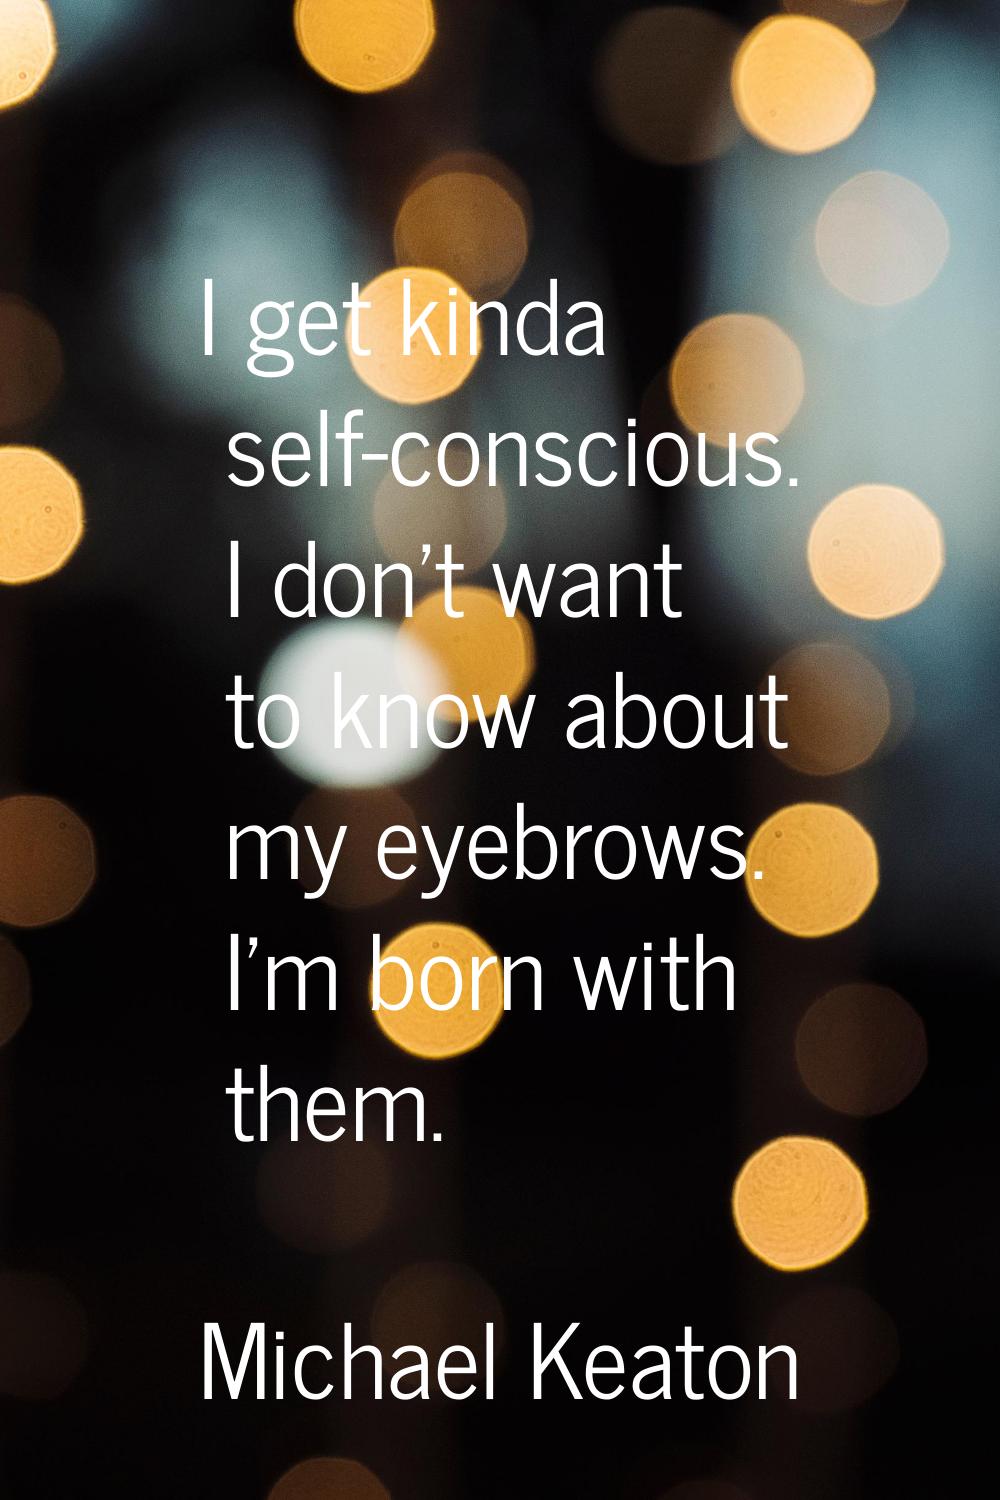 I get kinda self-conscious. I don't want to know about my eyebrows. I'm born with them.